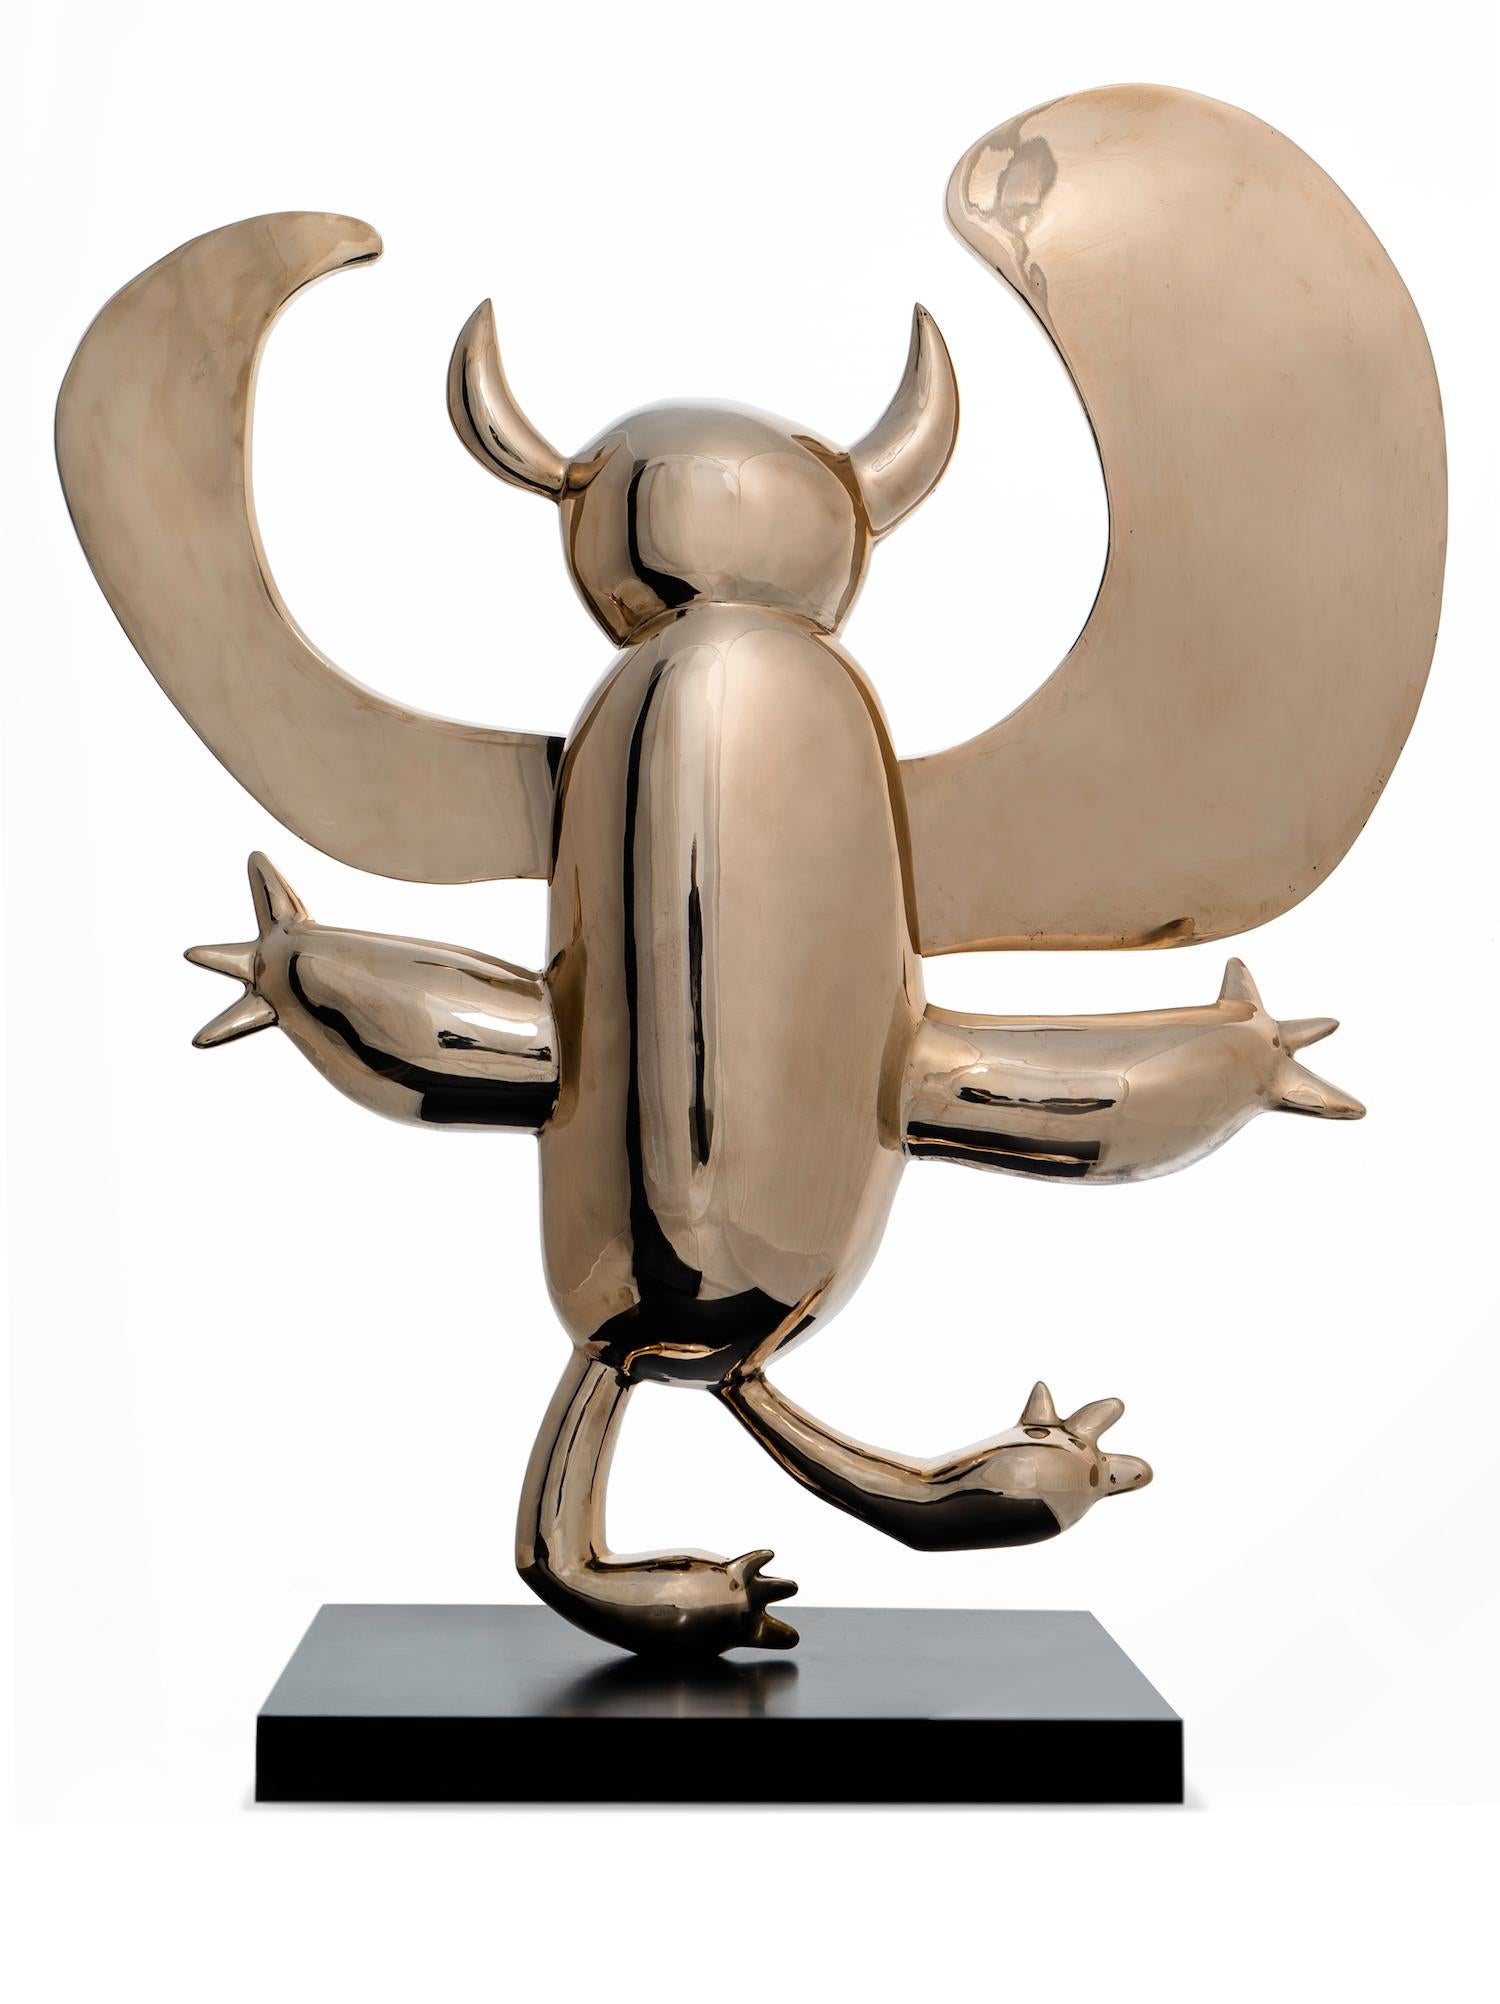 Winged Demon by Marcelo Martin Burgos - Polished bronze sculpture, golden For Sale 3